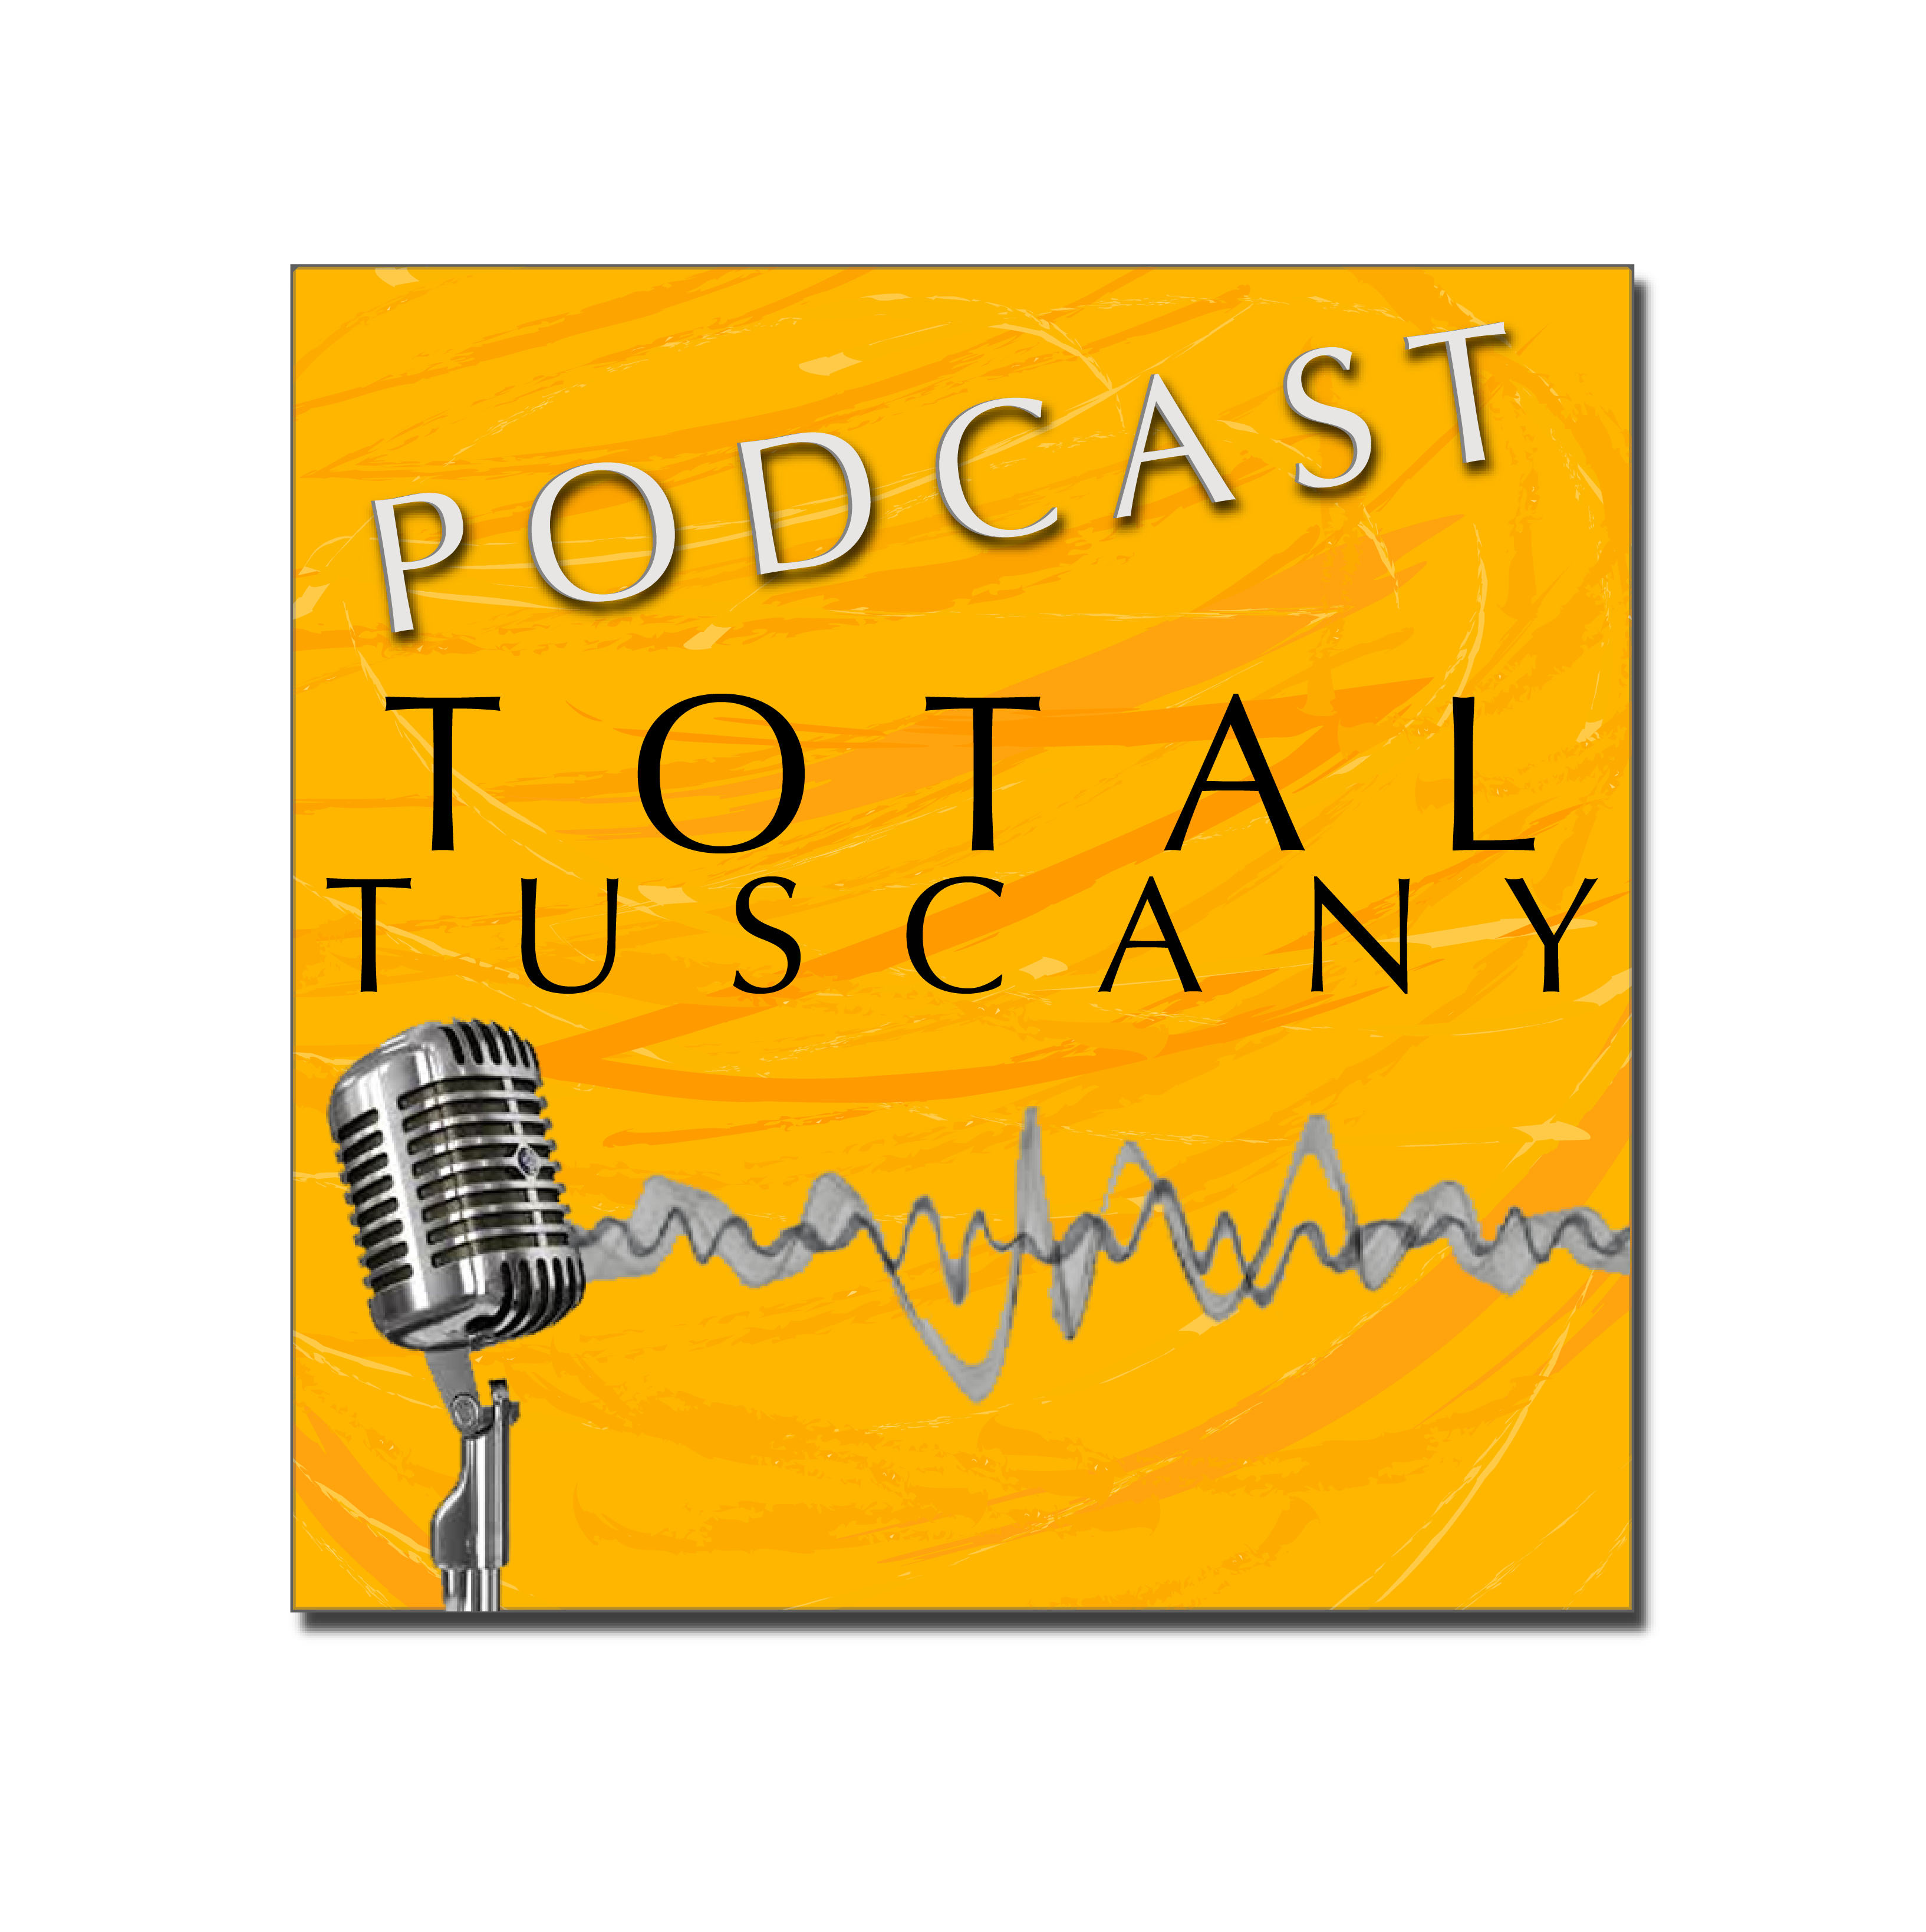 Episode 56: Dinner In The Vineyard, A Chianti Experience